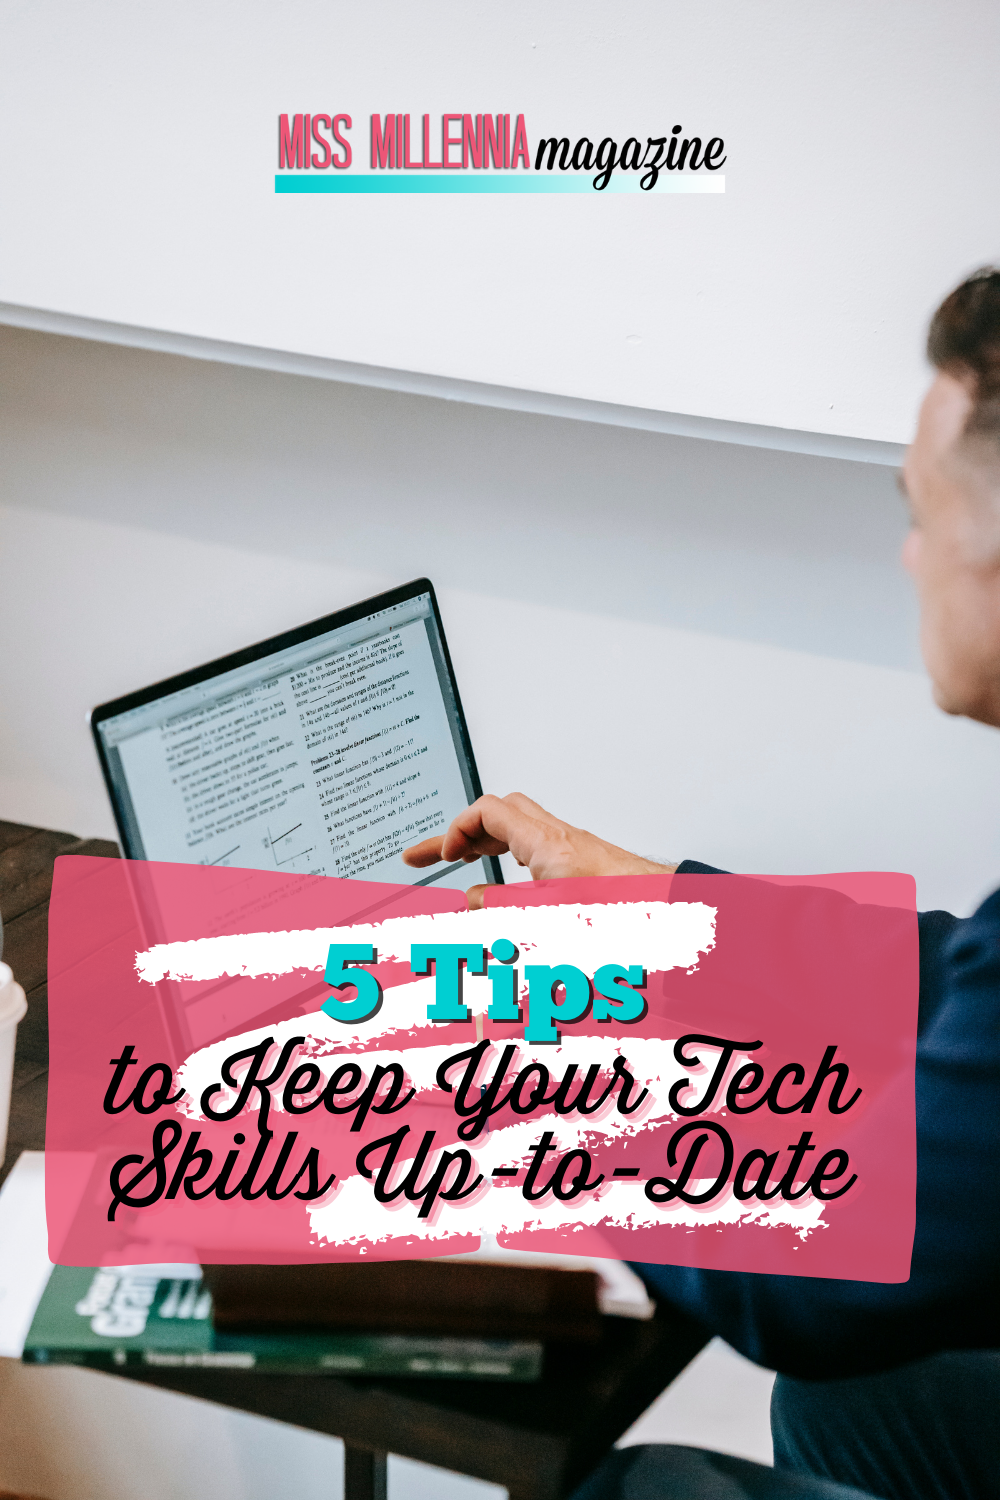 5 Tips to Keep Your Tech Skills Up-to-Date